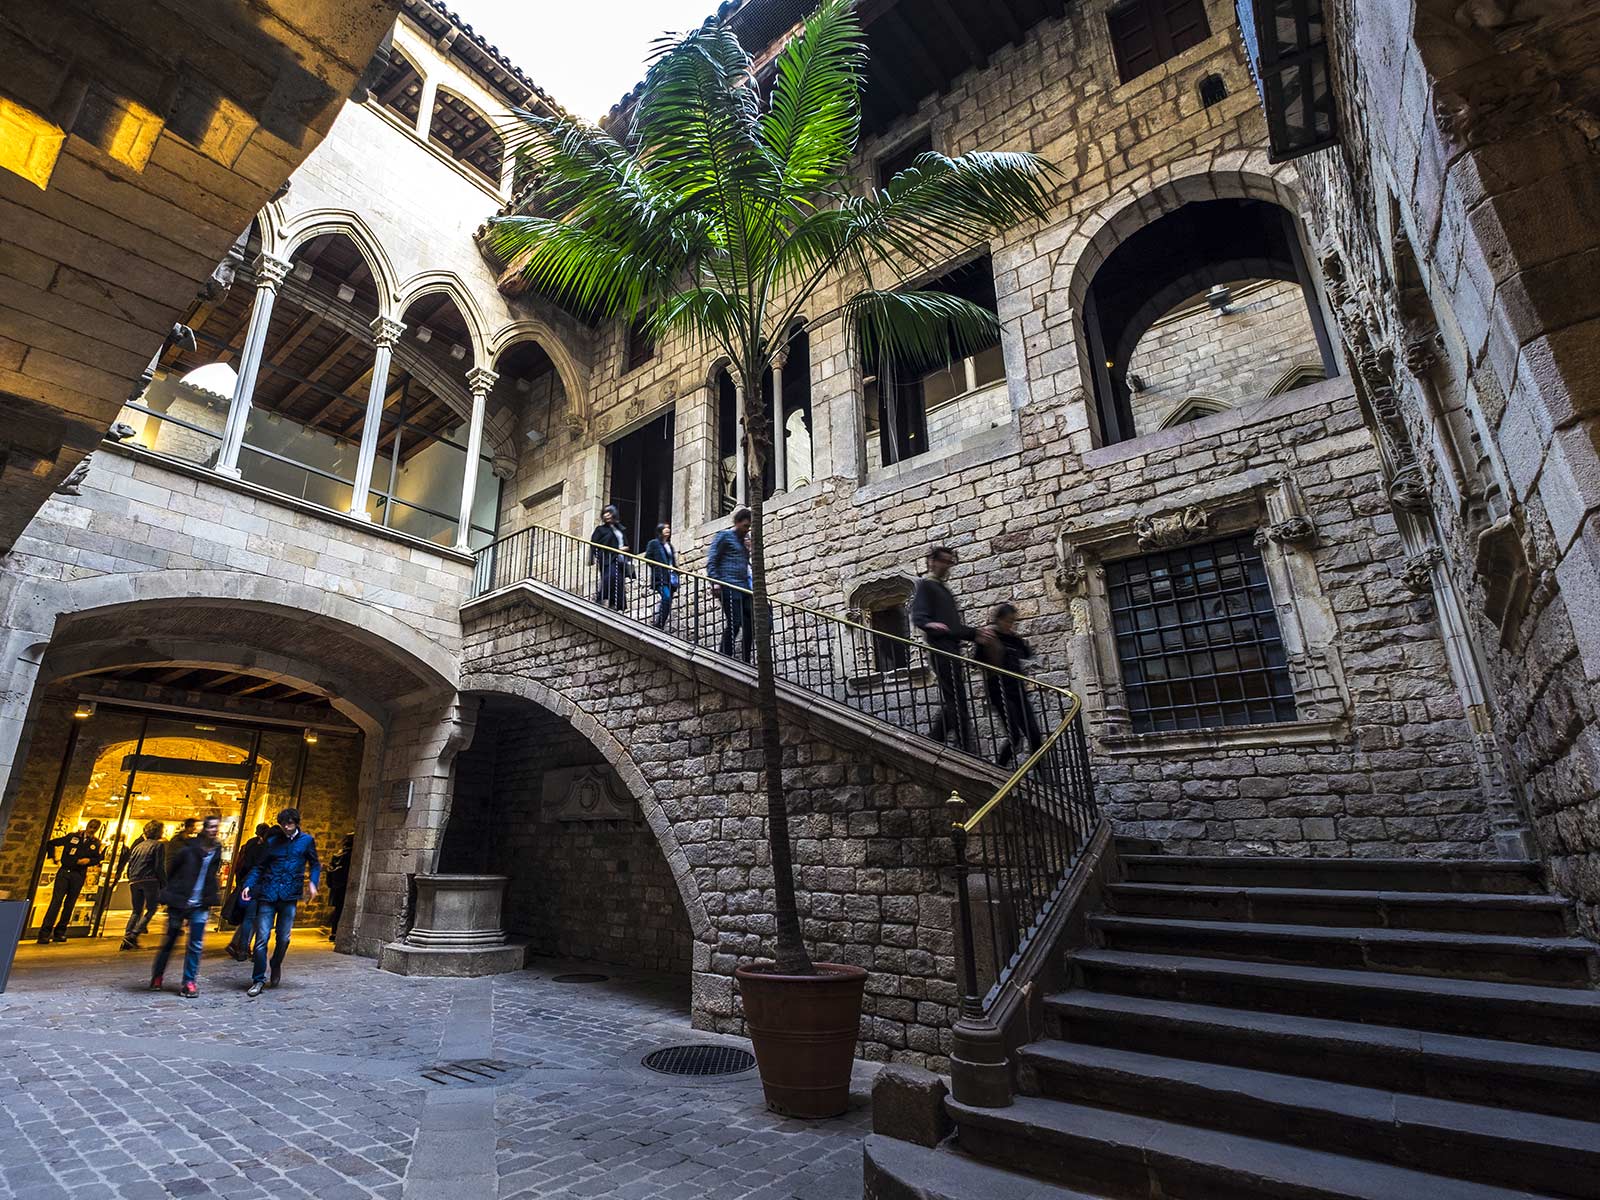 Picasso Museum in Barcelona. 10 things you must do in Barcelona